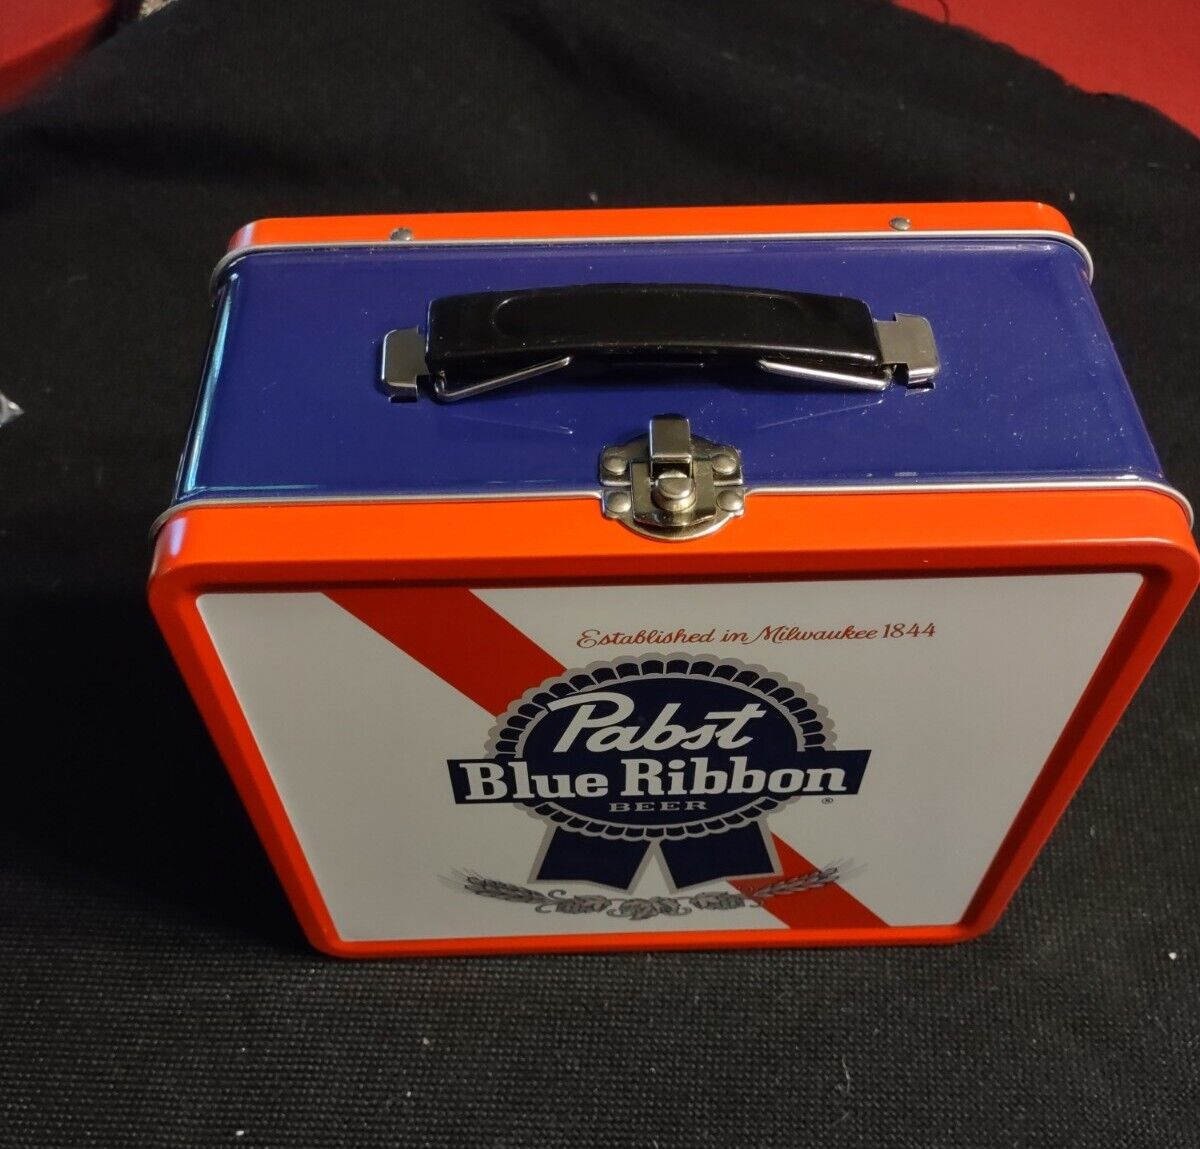 Pabst Blue Ribbon Metal Lunchbox Vintage Style Lunch Box New